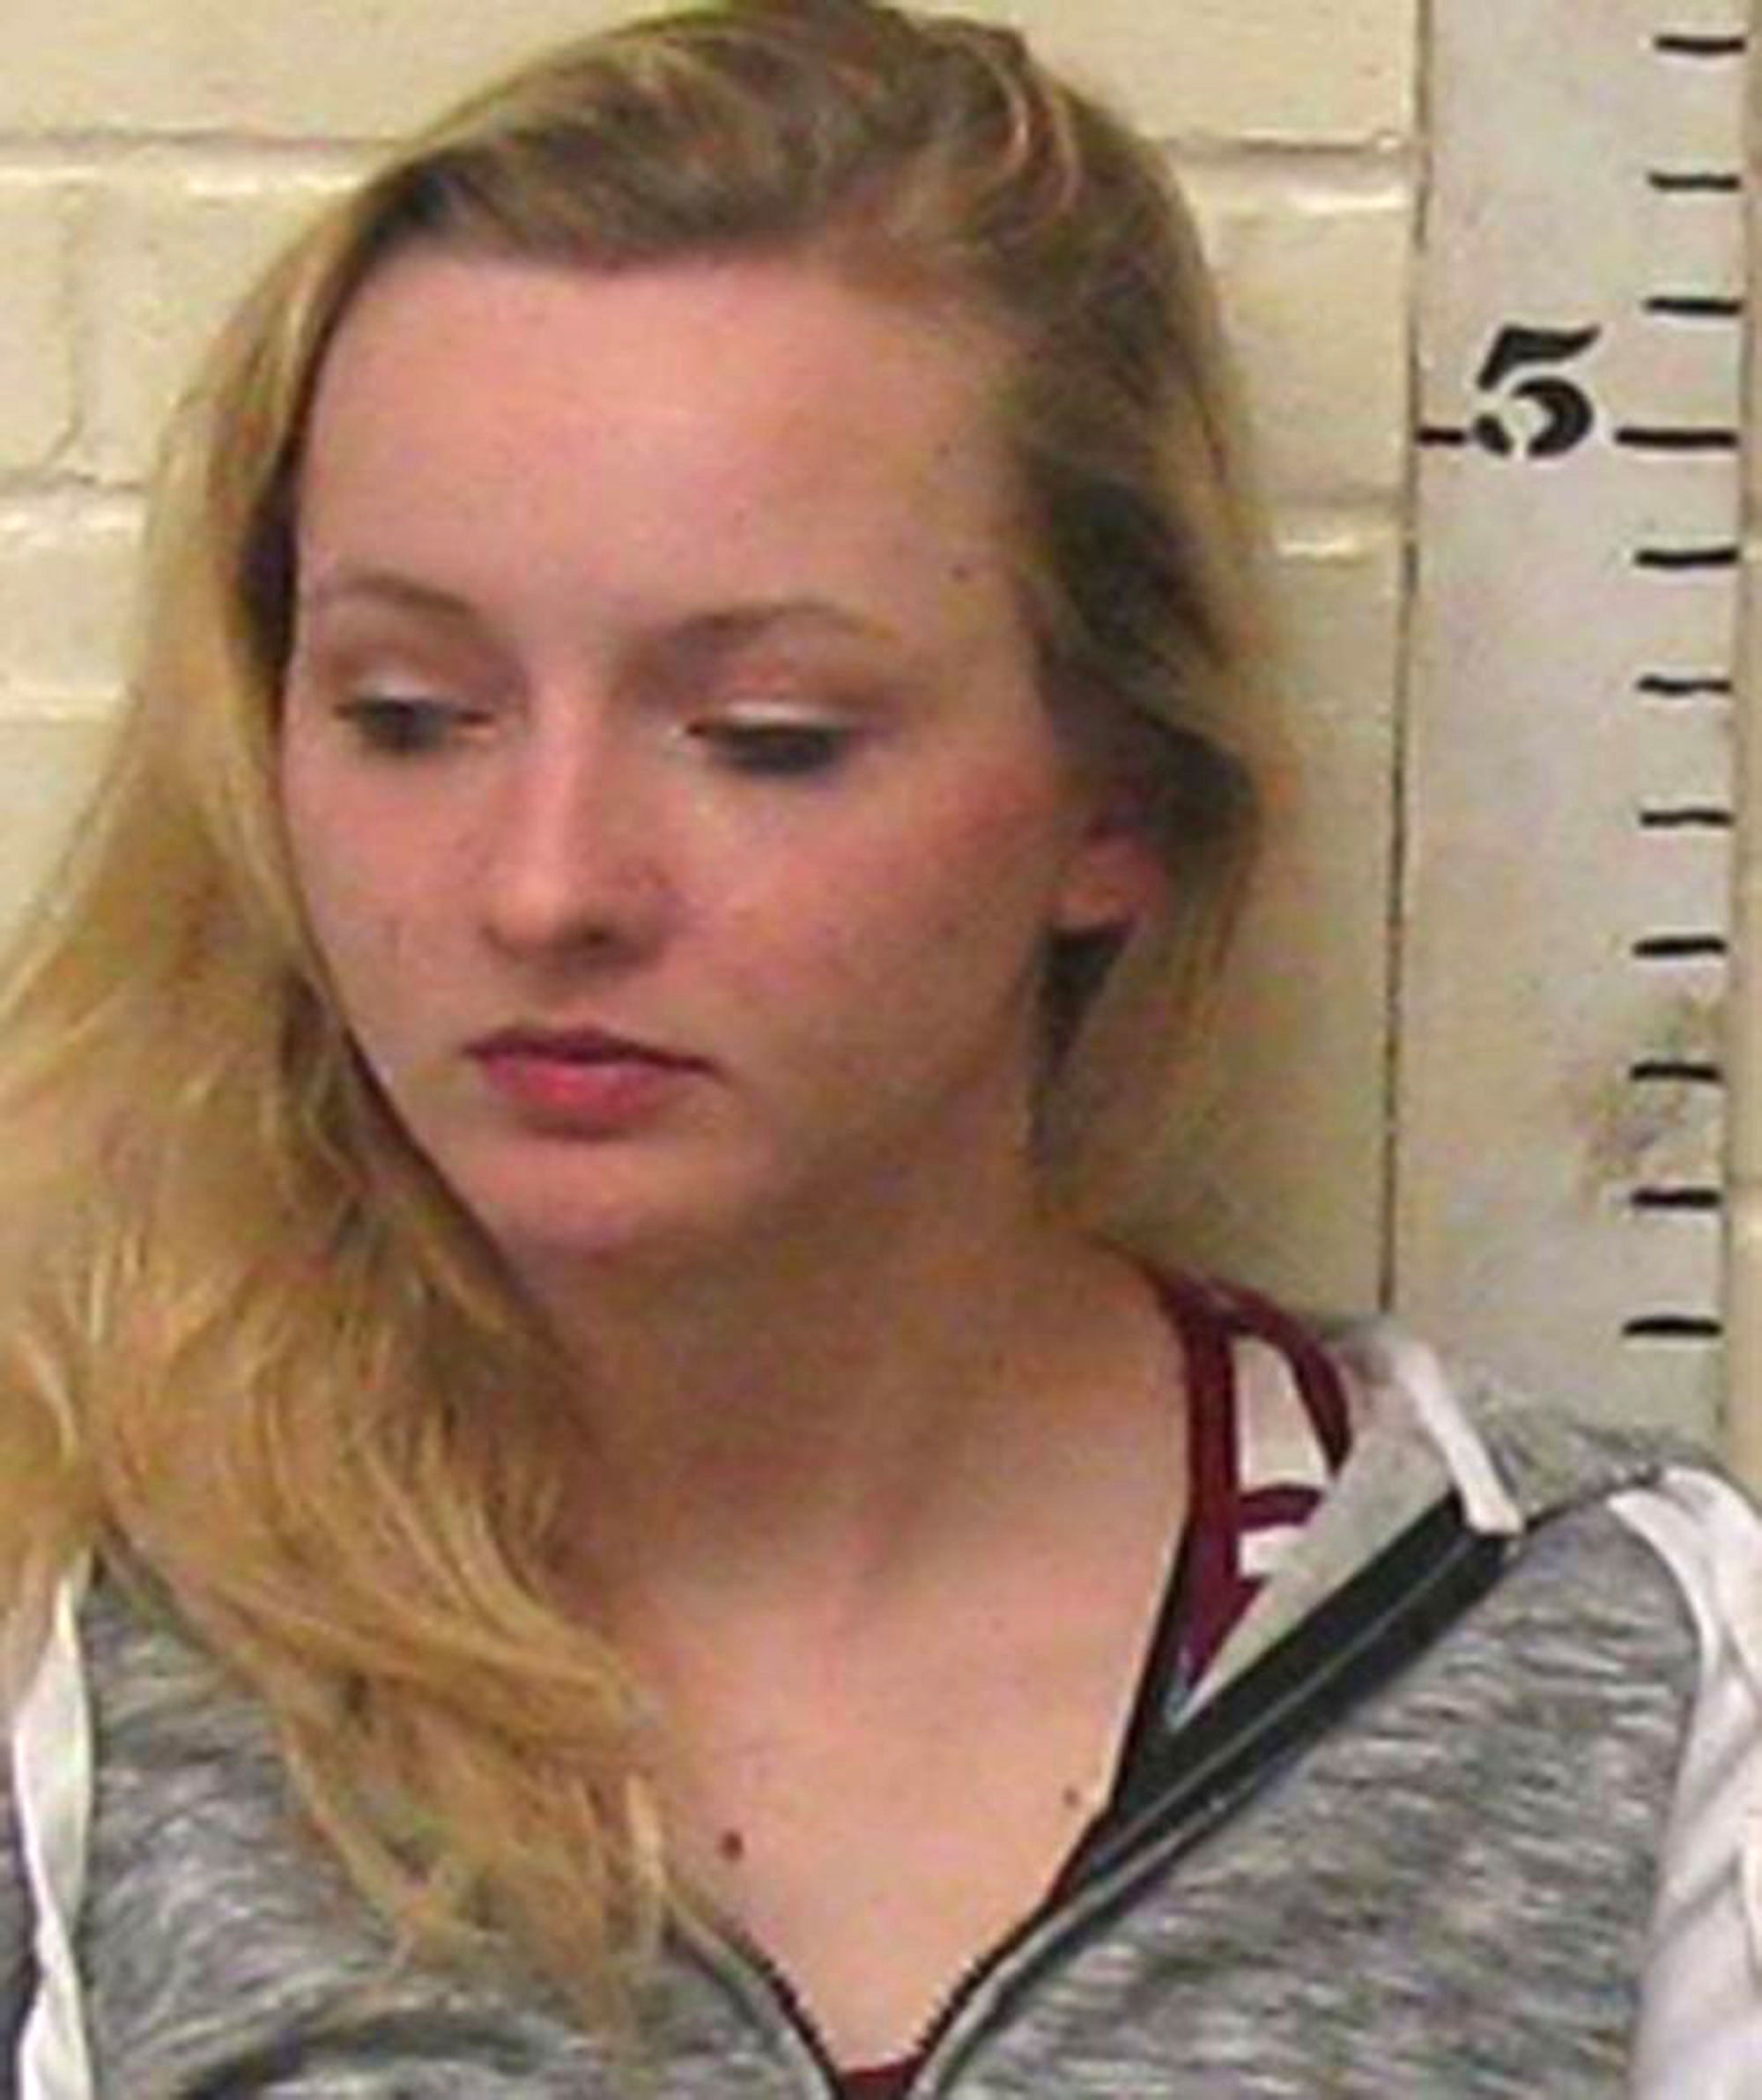 Texas Teen Admits Claim of Gang Rape By African-American Men Was A ‘Hoax’